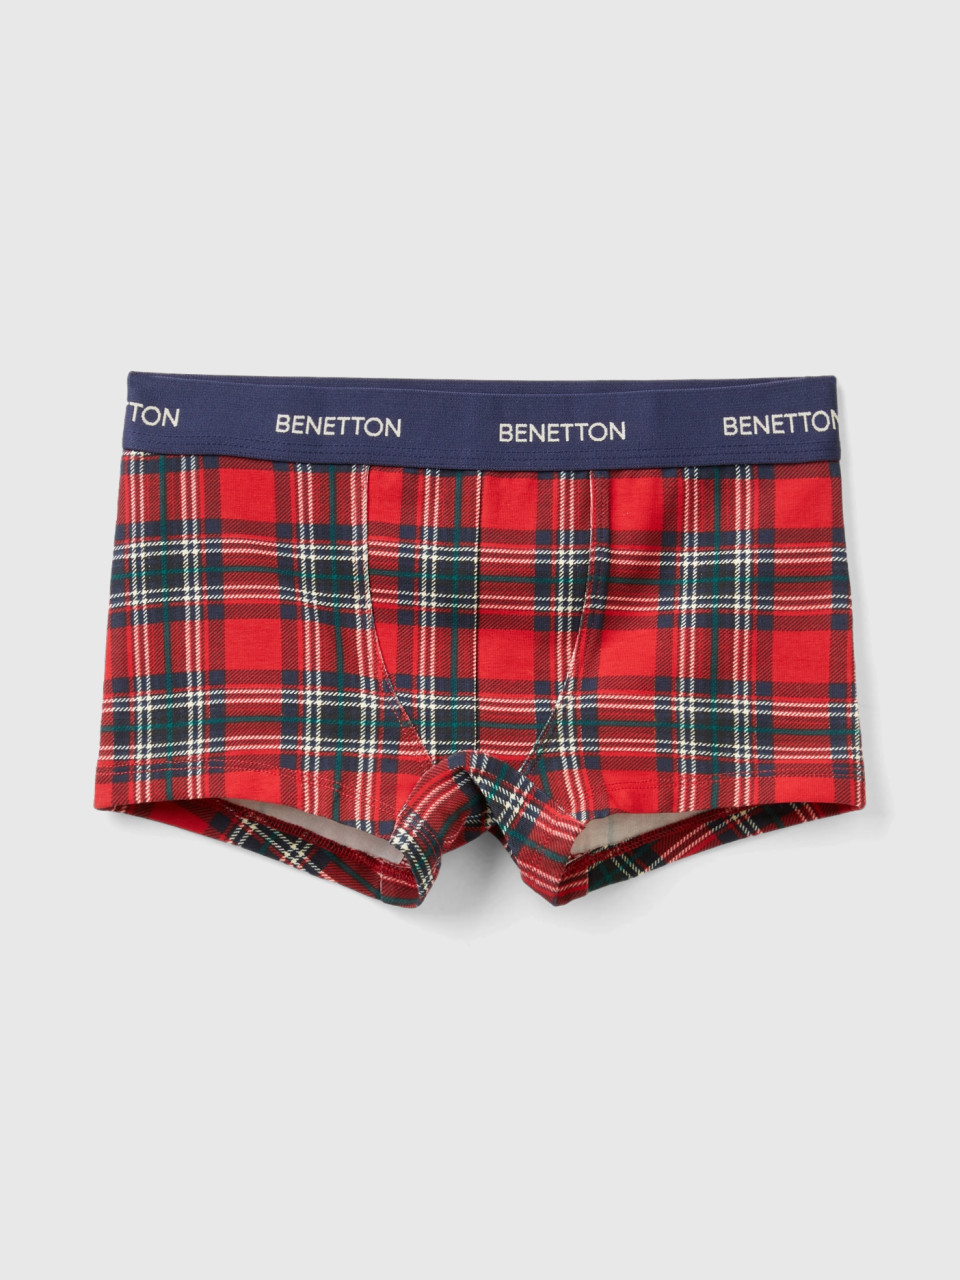 Benetton, Red And Blue Tartan Boxer Shorts, Red, Kids